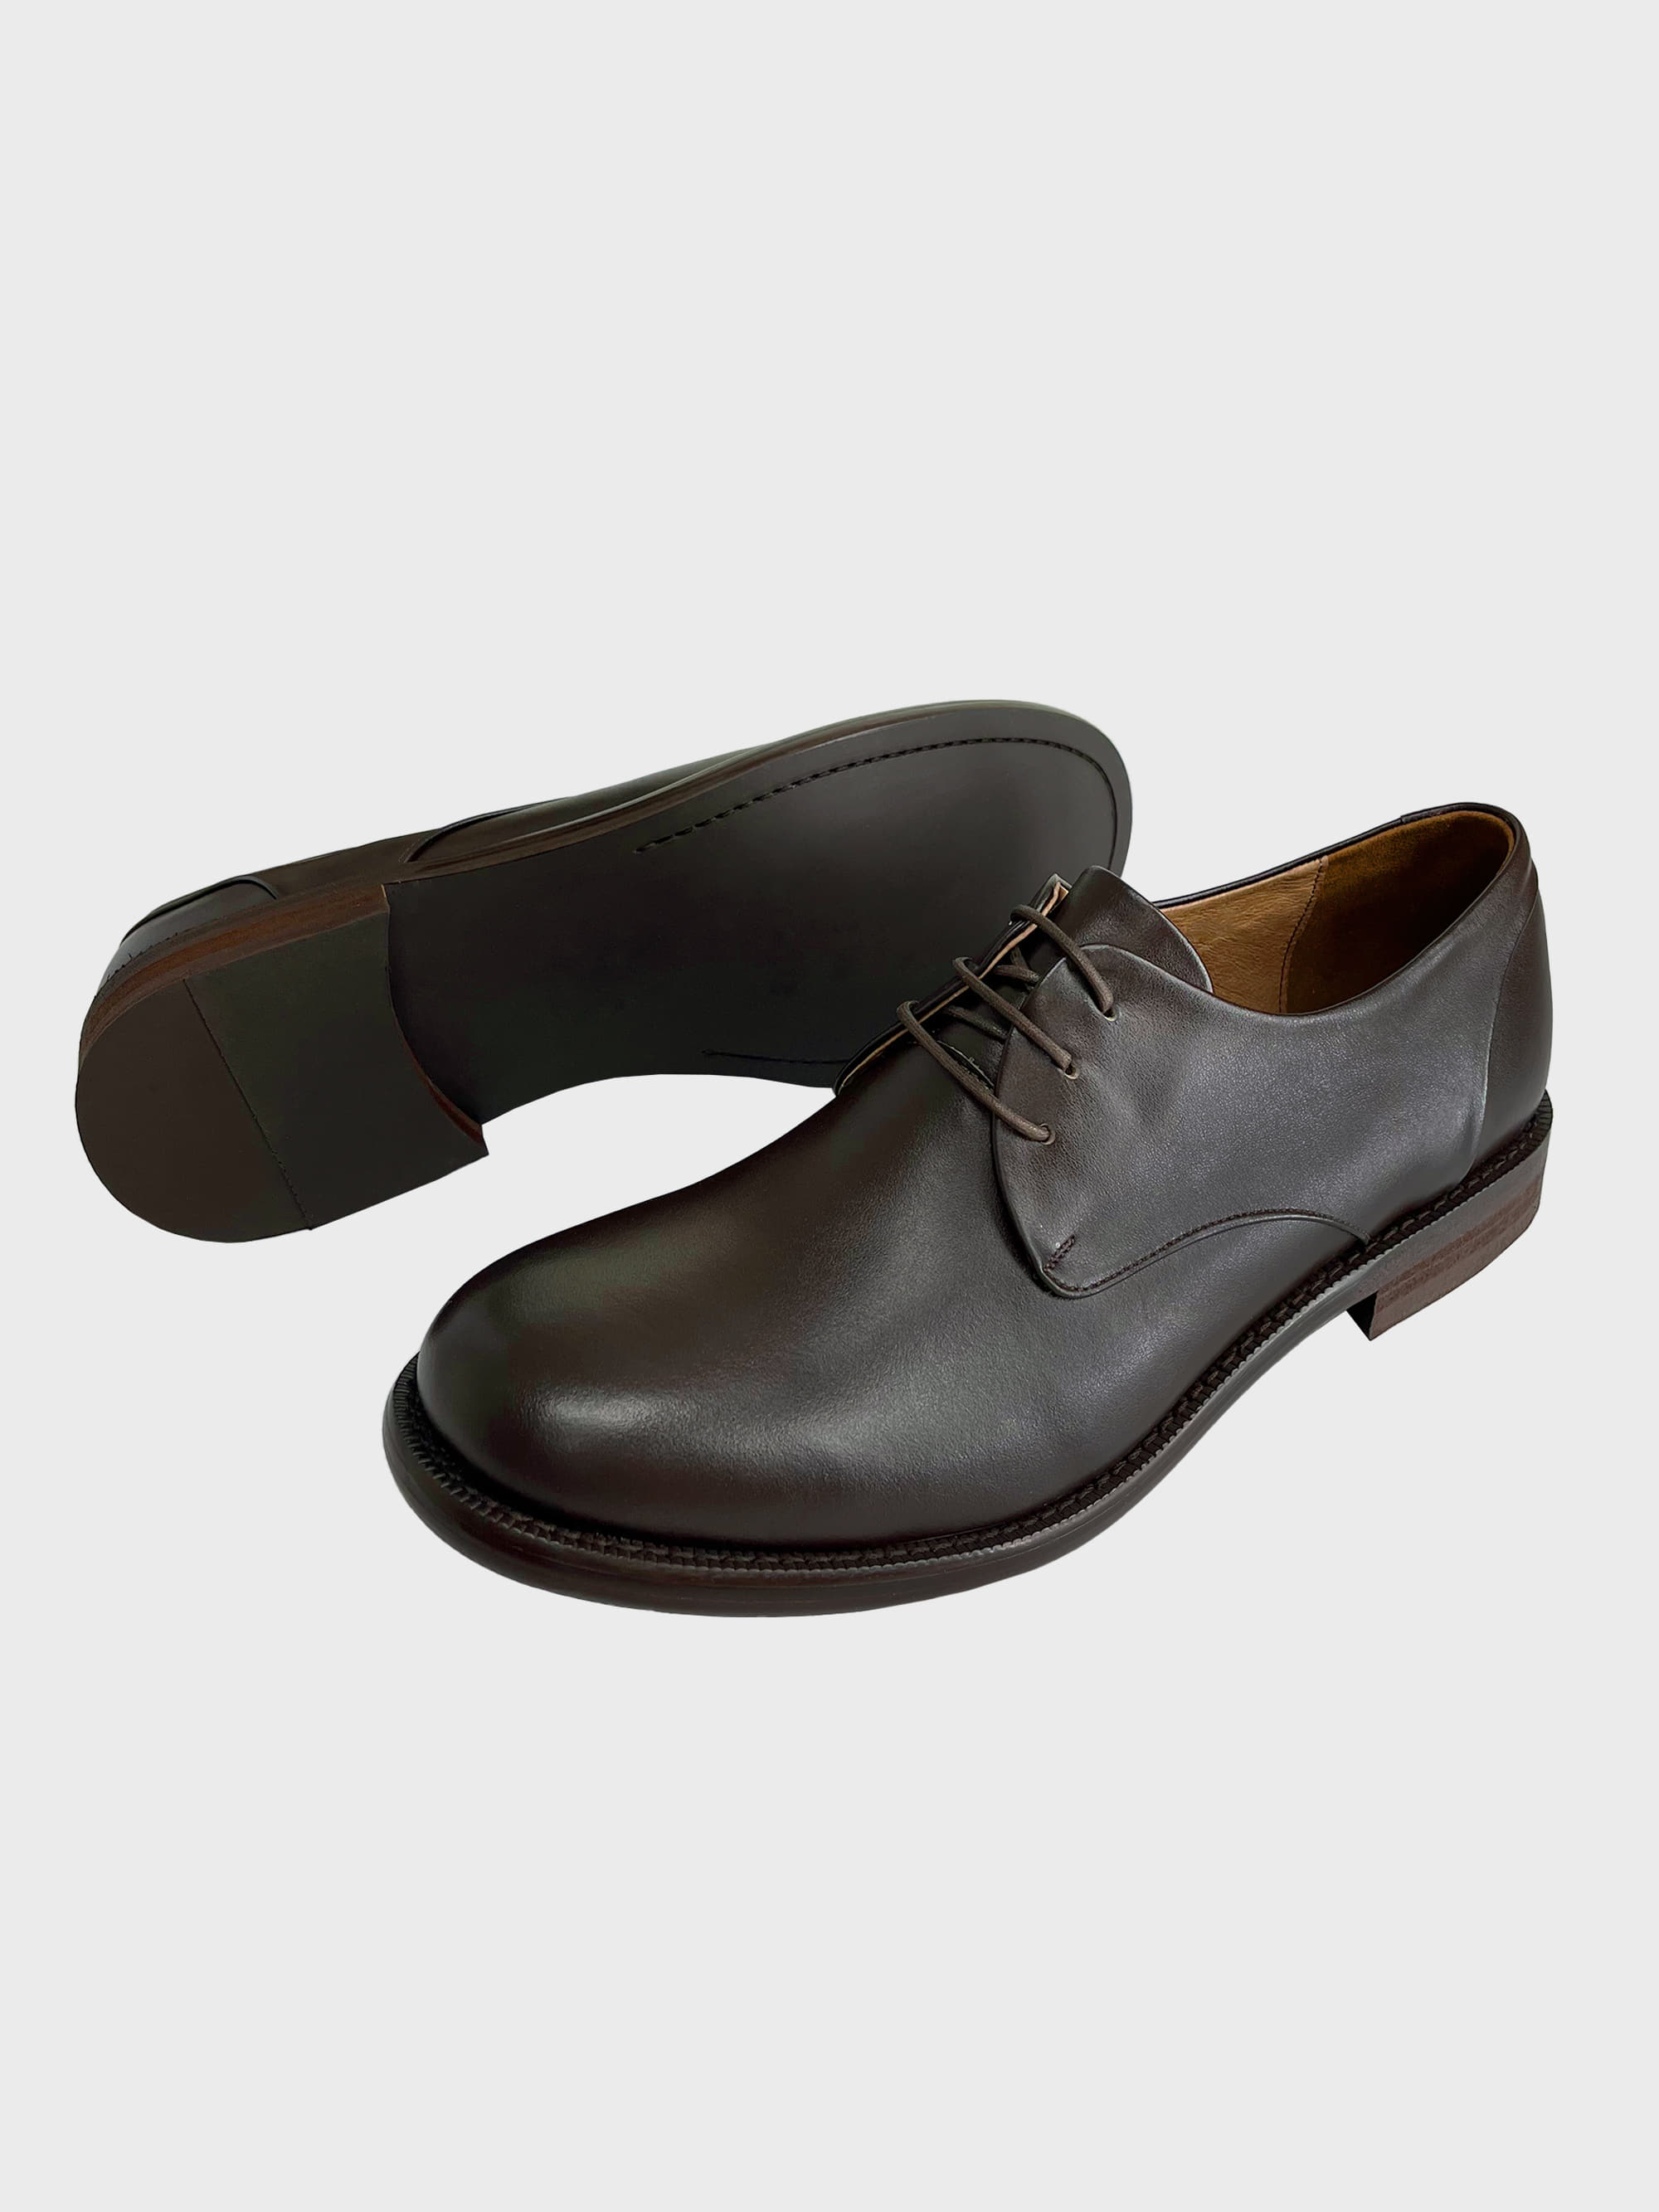 Adam cow leather brown derby shoes (1color)